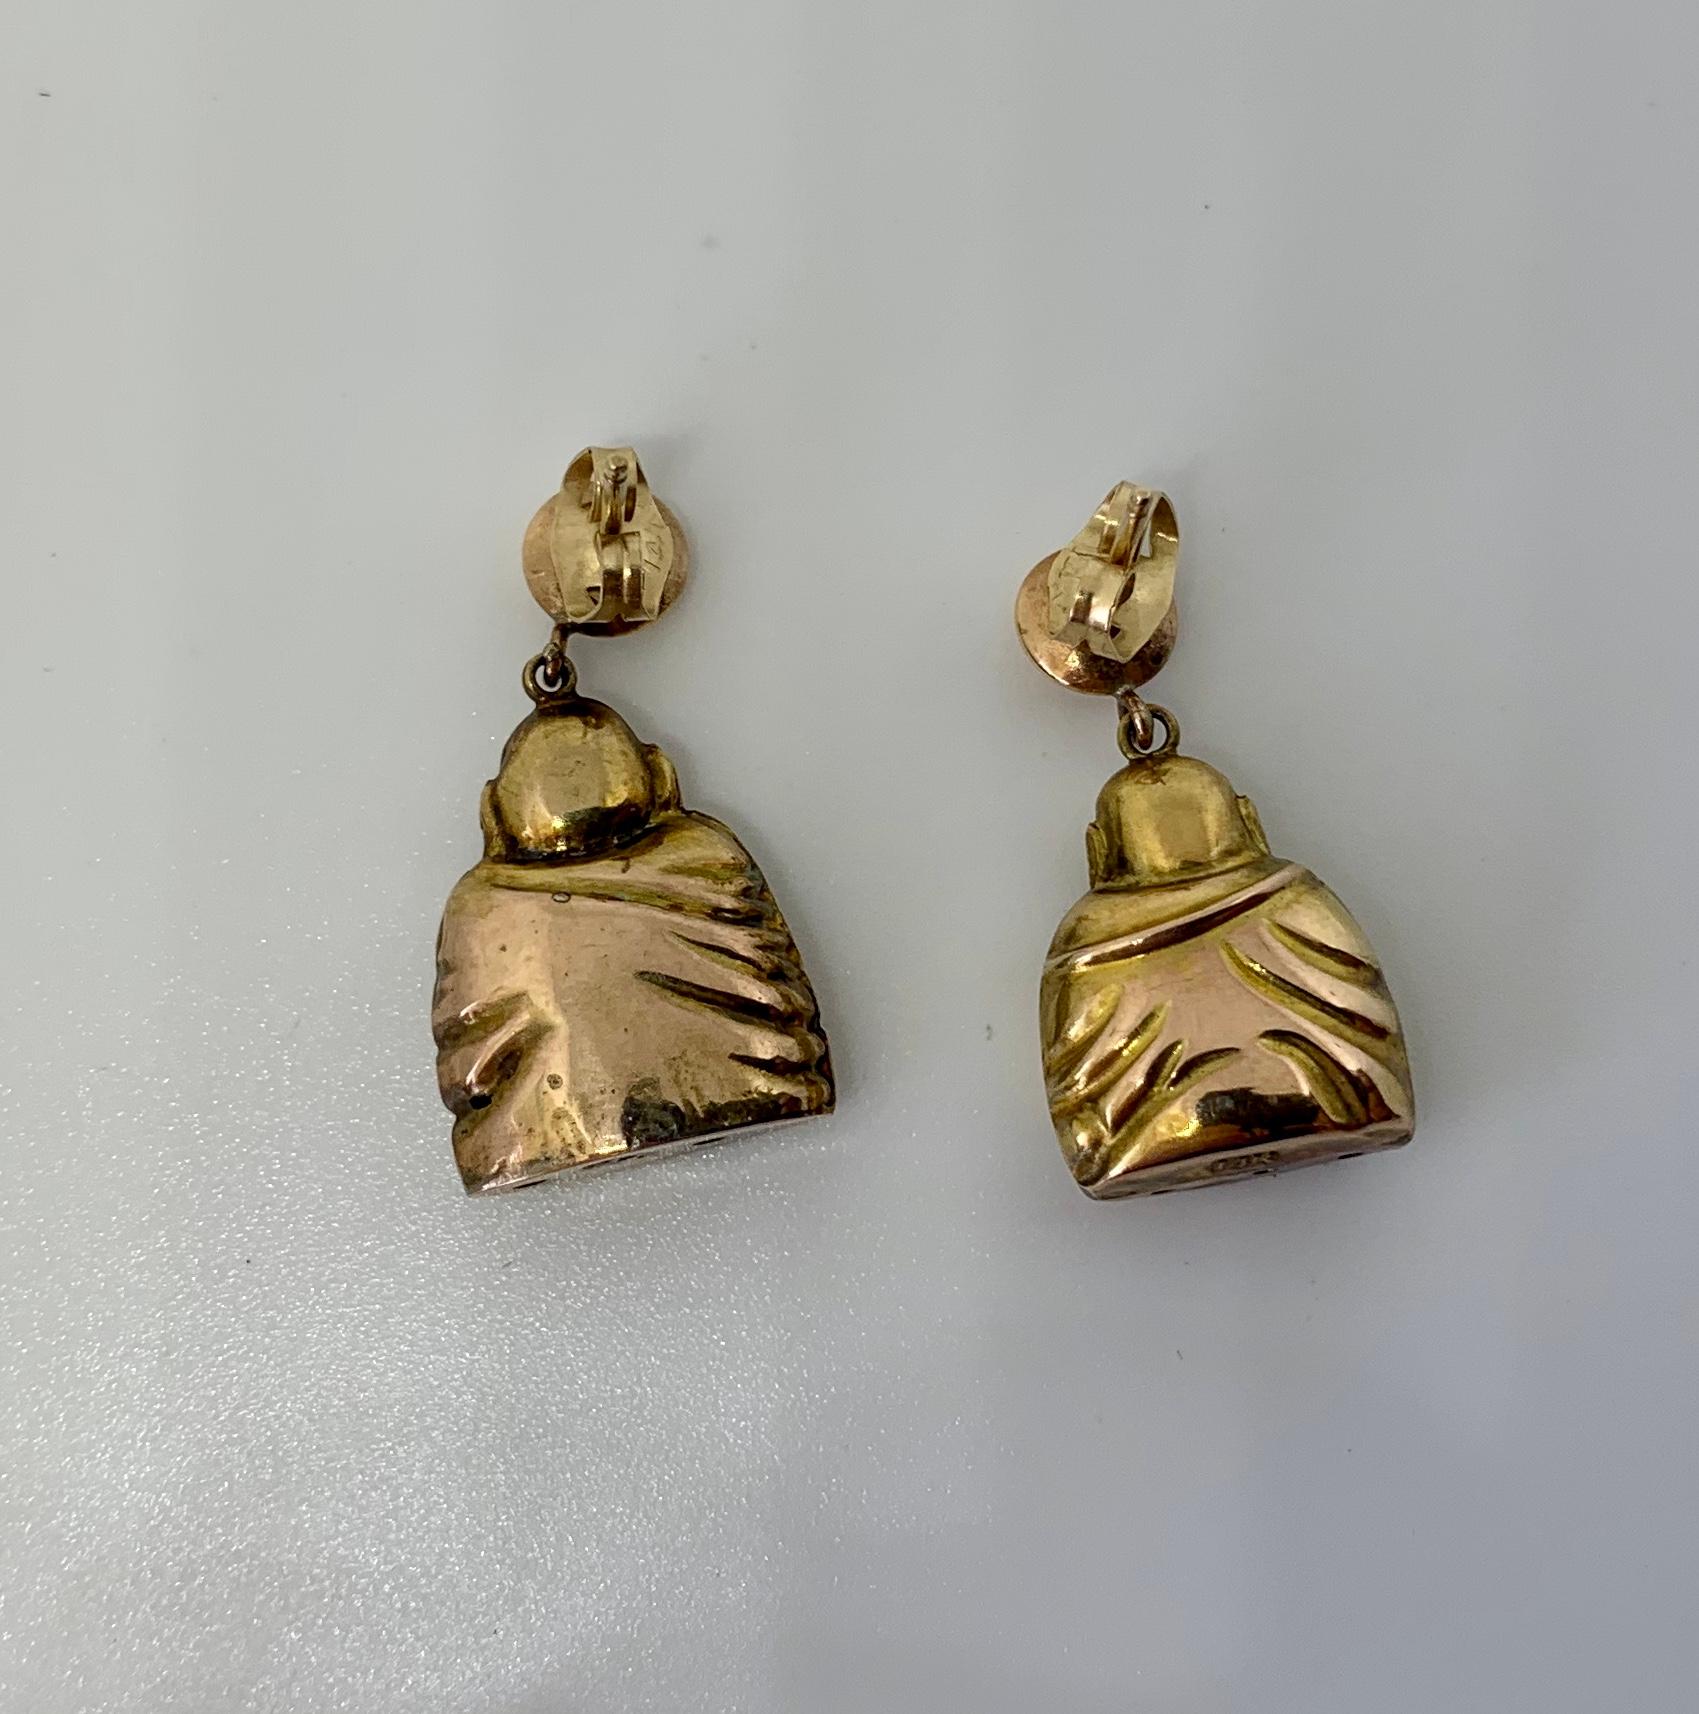 Smiling Happy Buddha Earrings Antique 14 Karat Gold Dangle Drop Earrings In Good Condition For Sale In New York, NY